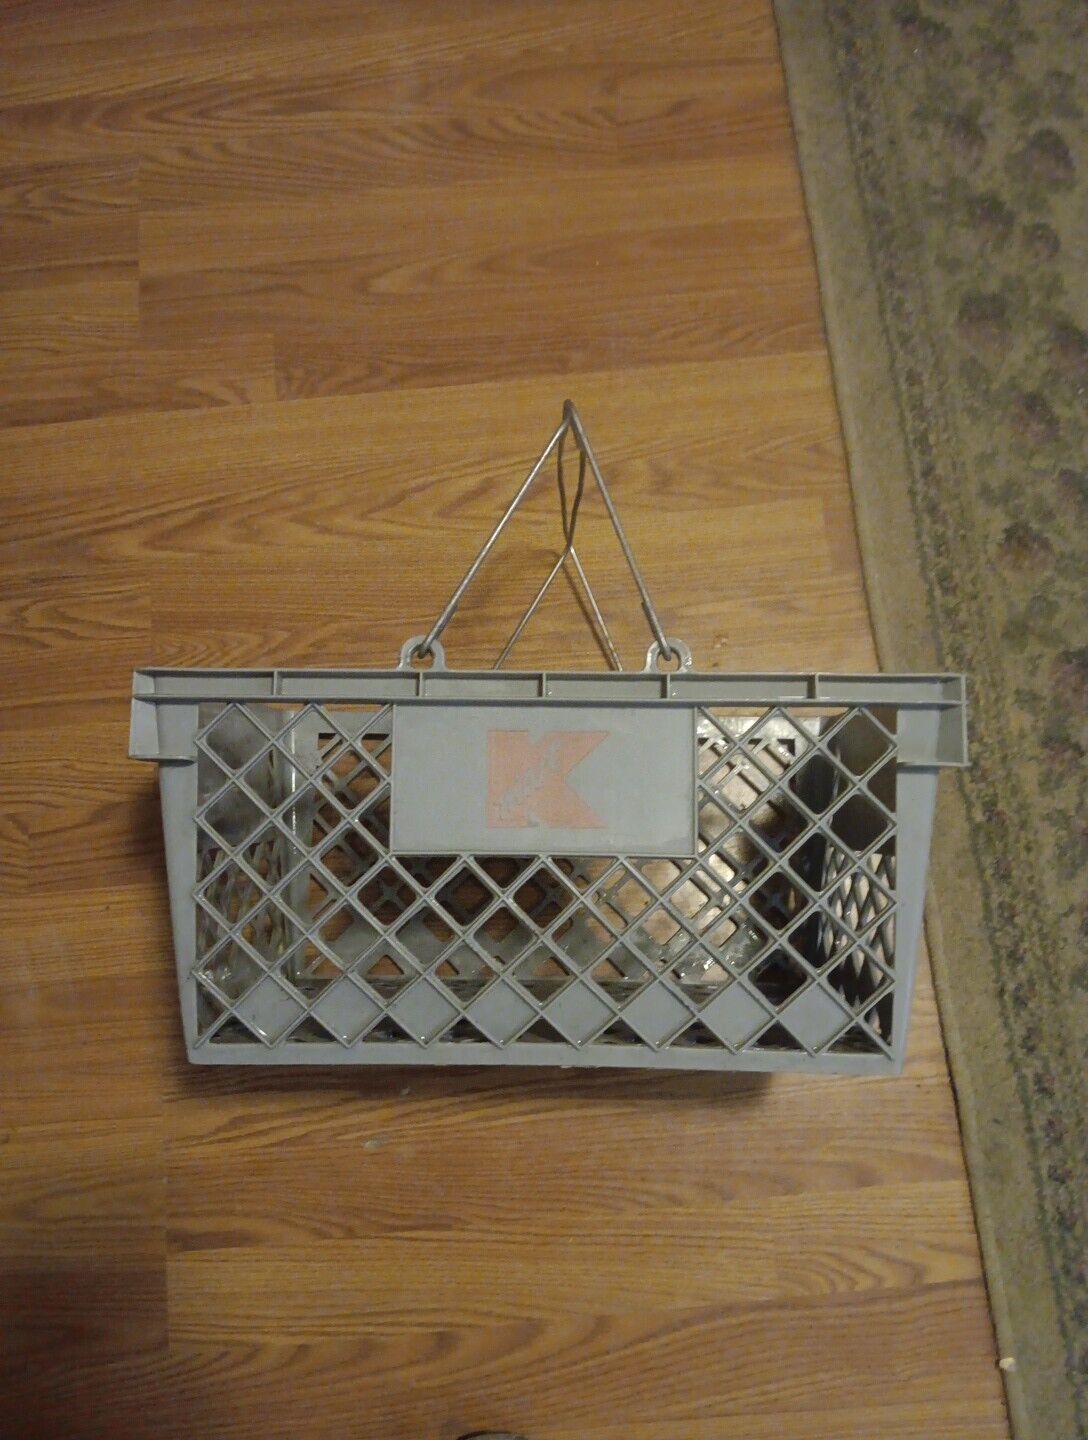 Kmart Gray Shopping Basket with Wire Handles Early 1990s Rare Retail Collectible